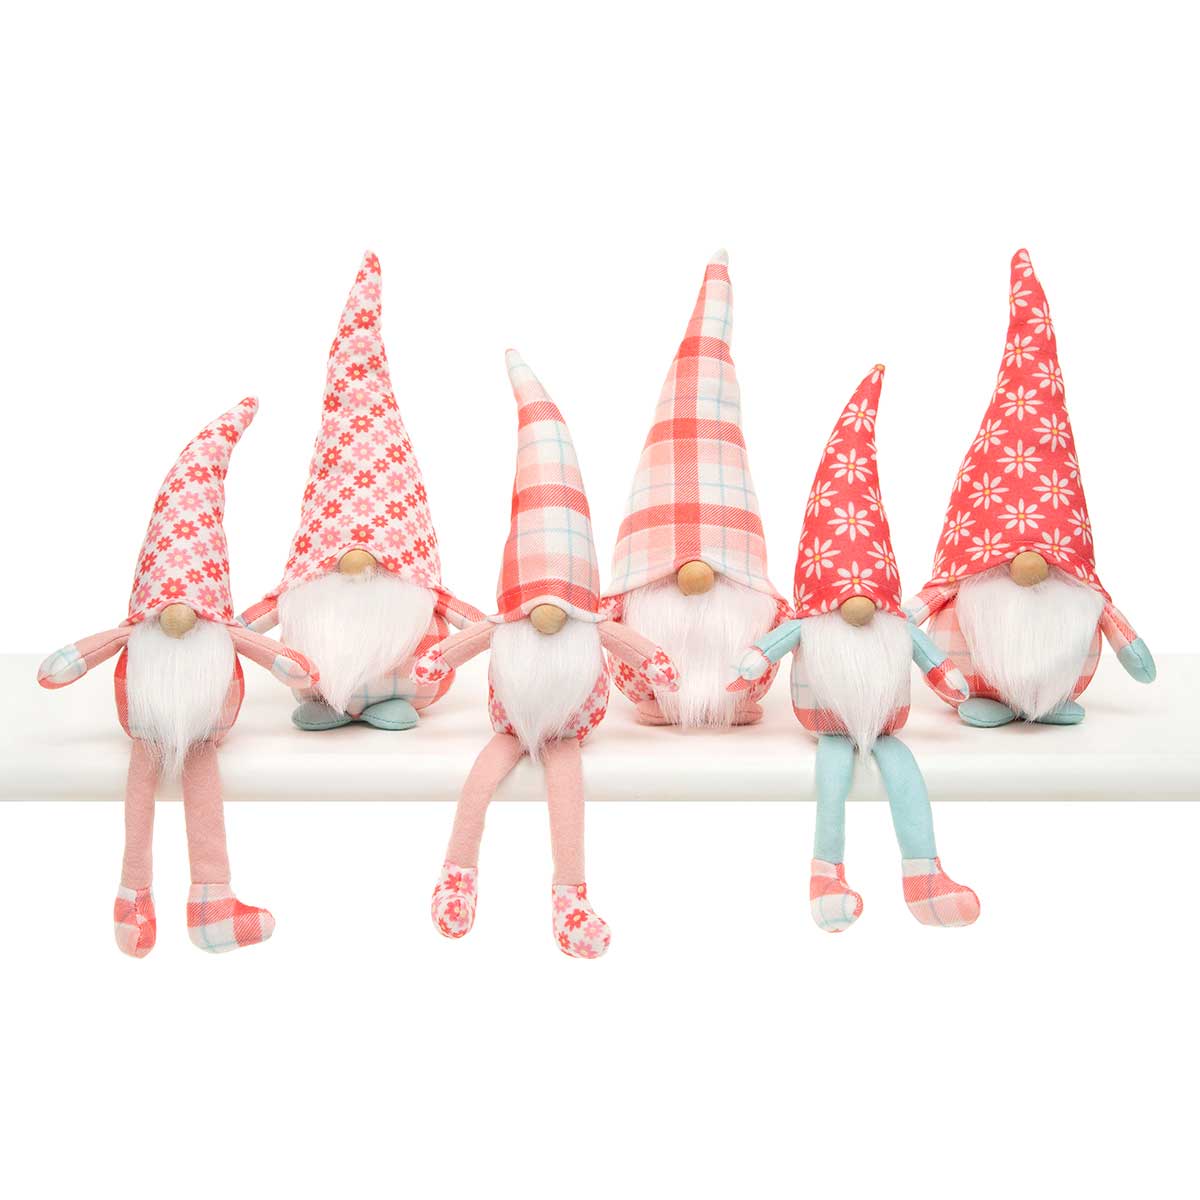 CORAL FAIR GNOME CORAL/WHITE/BLUE WITH WIRED HAT,